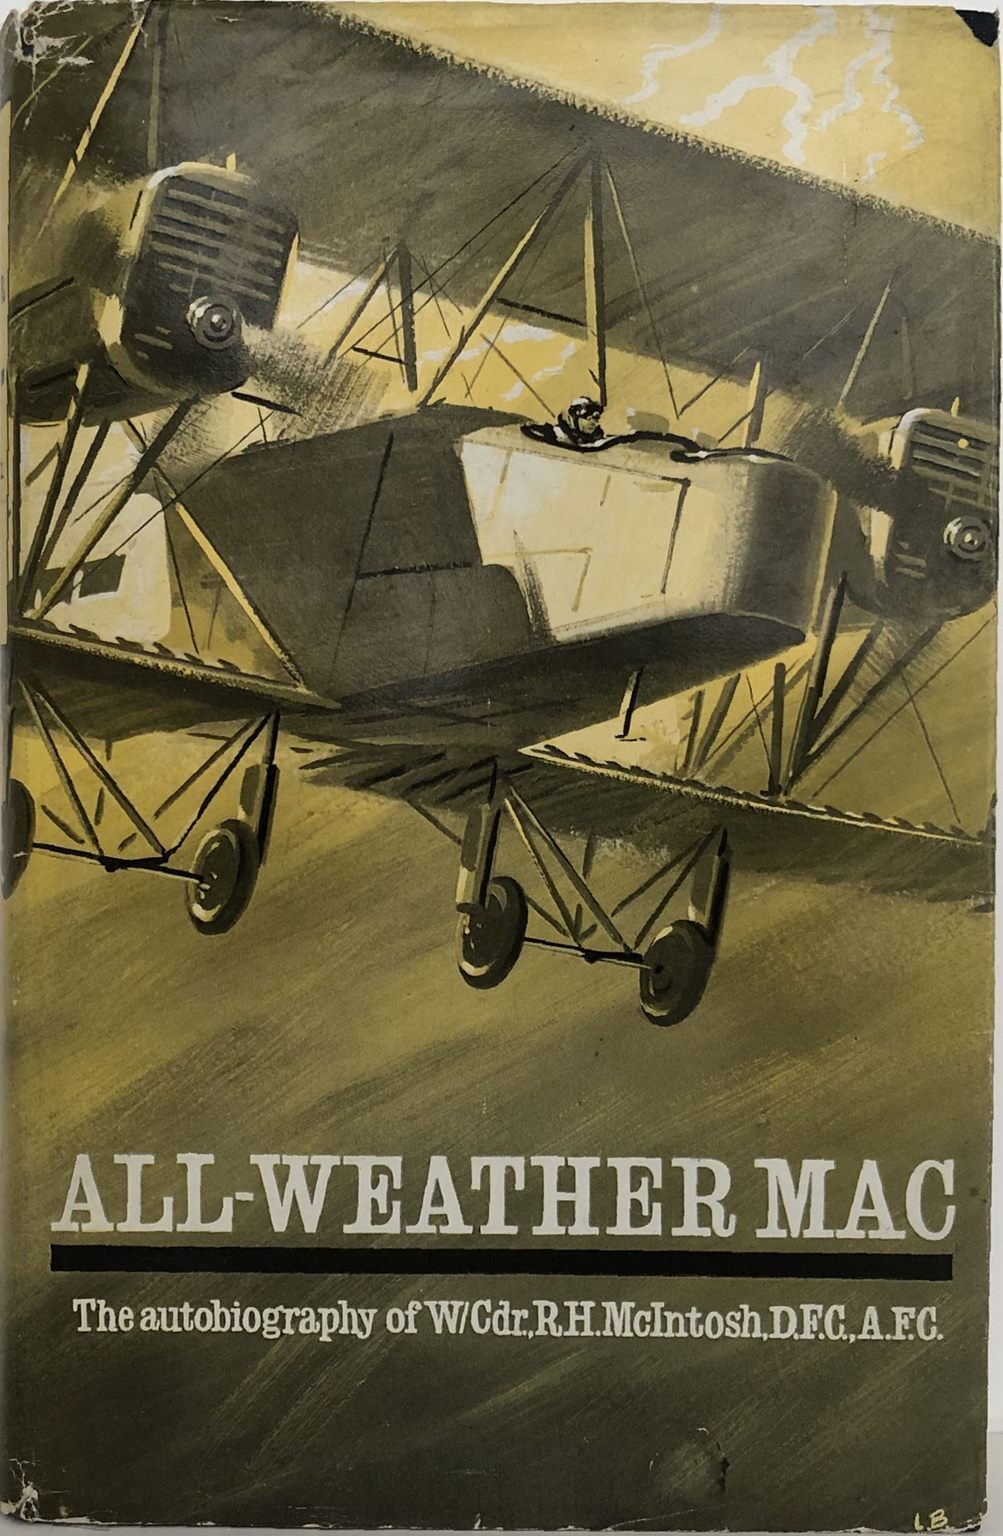 ALL-WEATHER MAC. The Autobiography of Wing-Commander, D.F.C., AFC